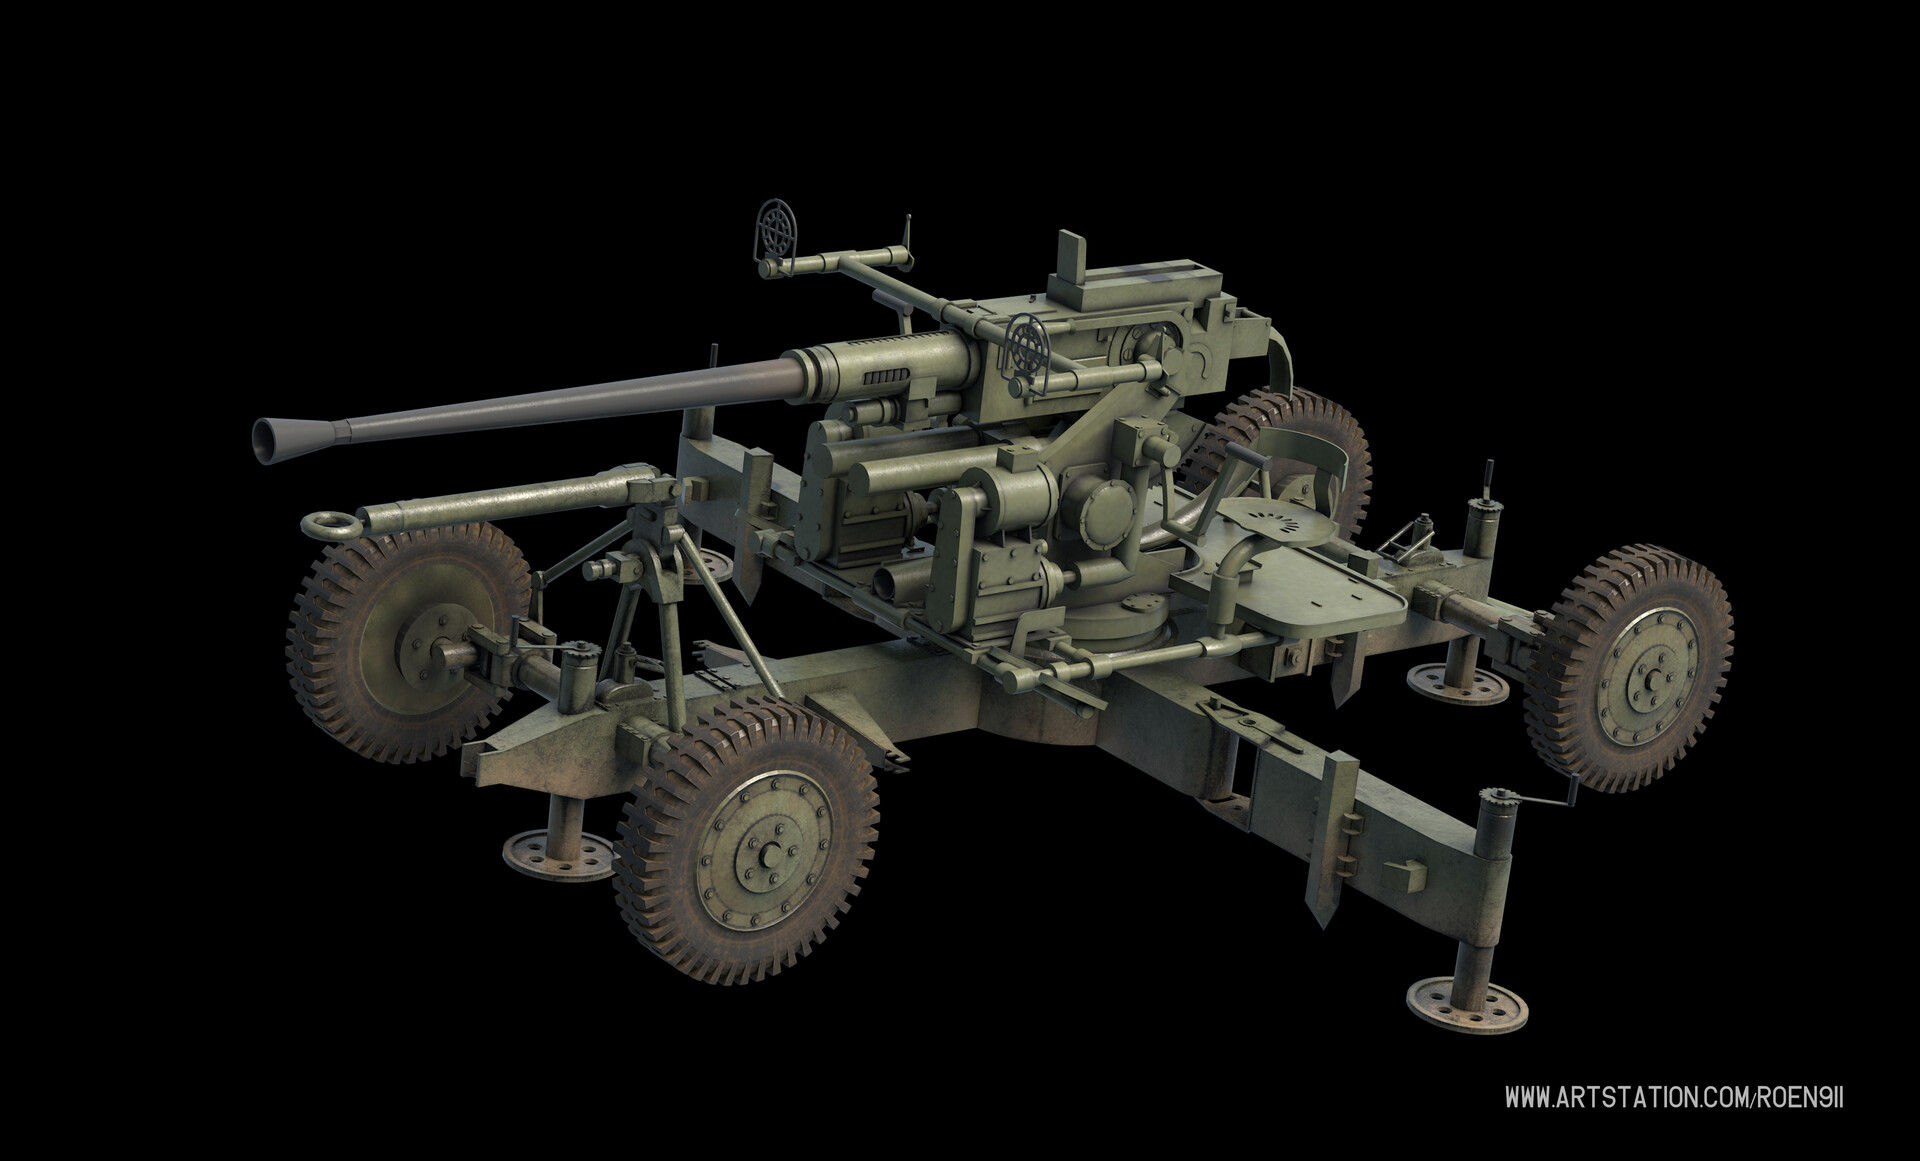 40mm cannon